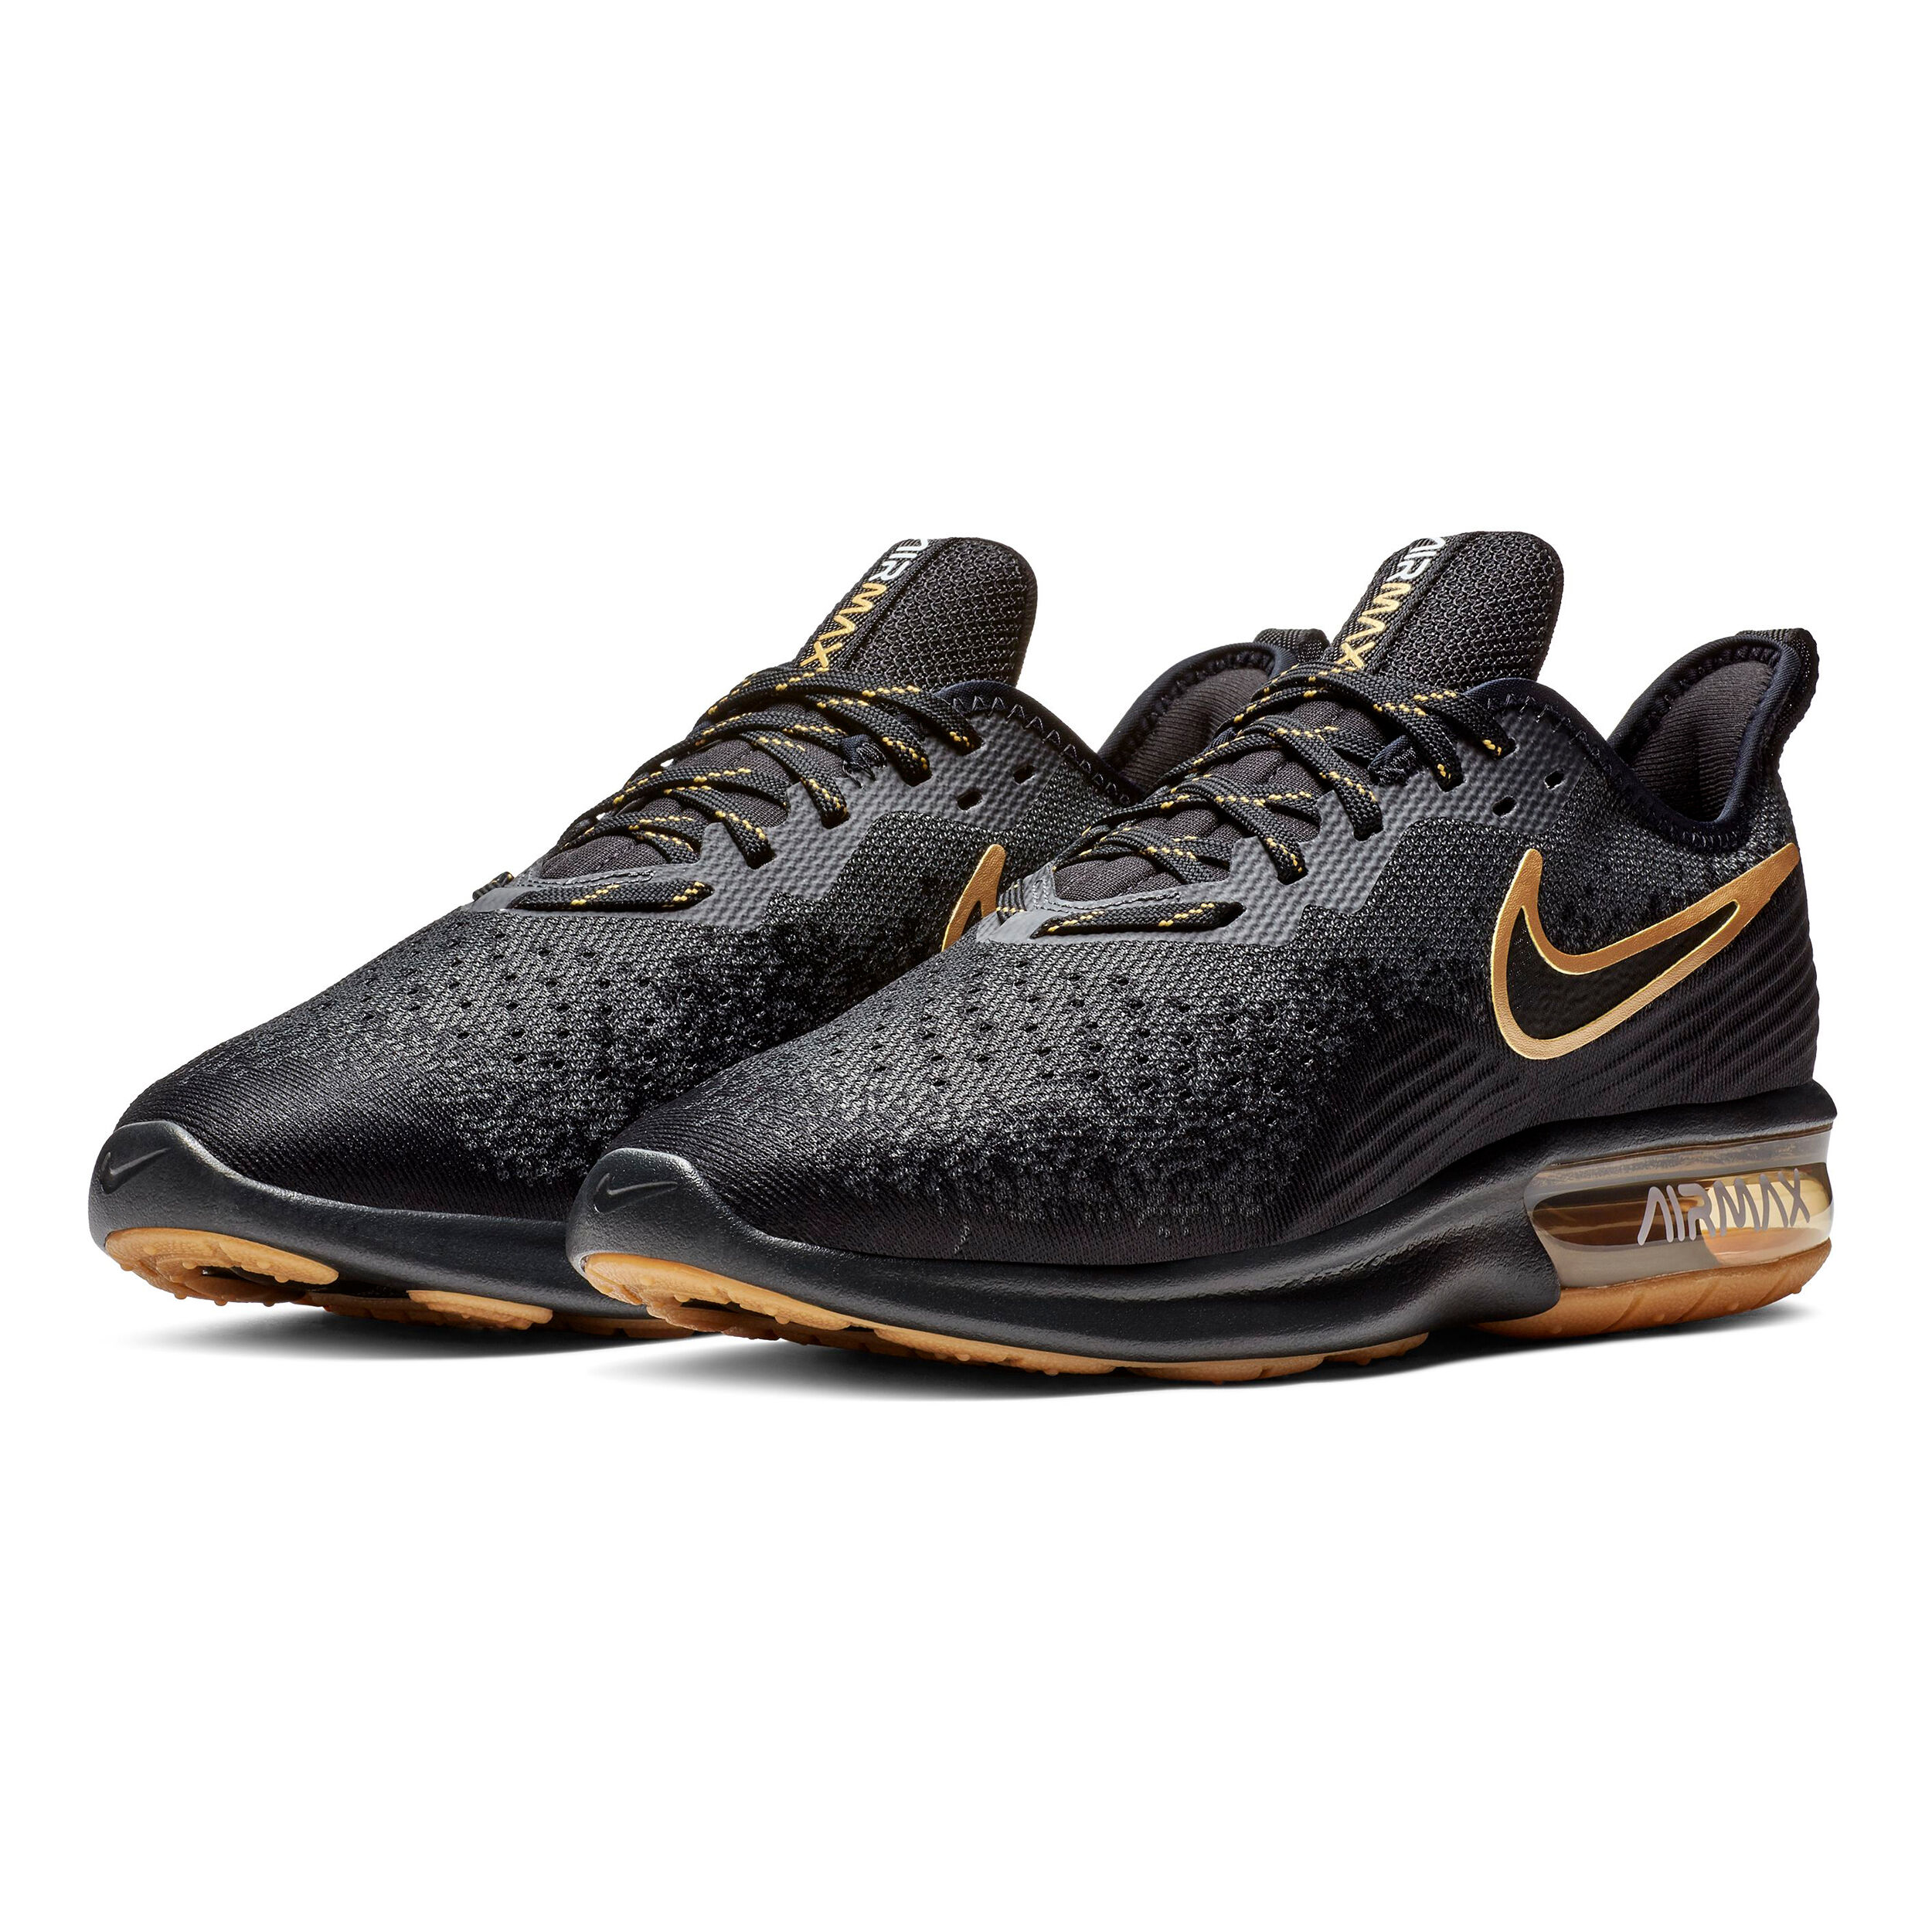 nike sequent black